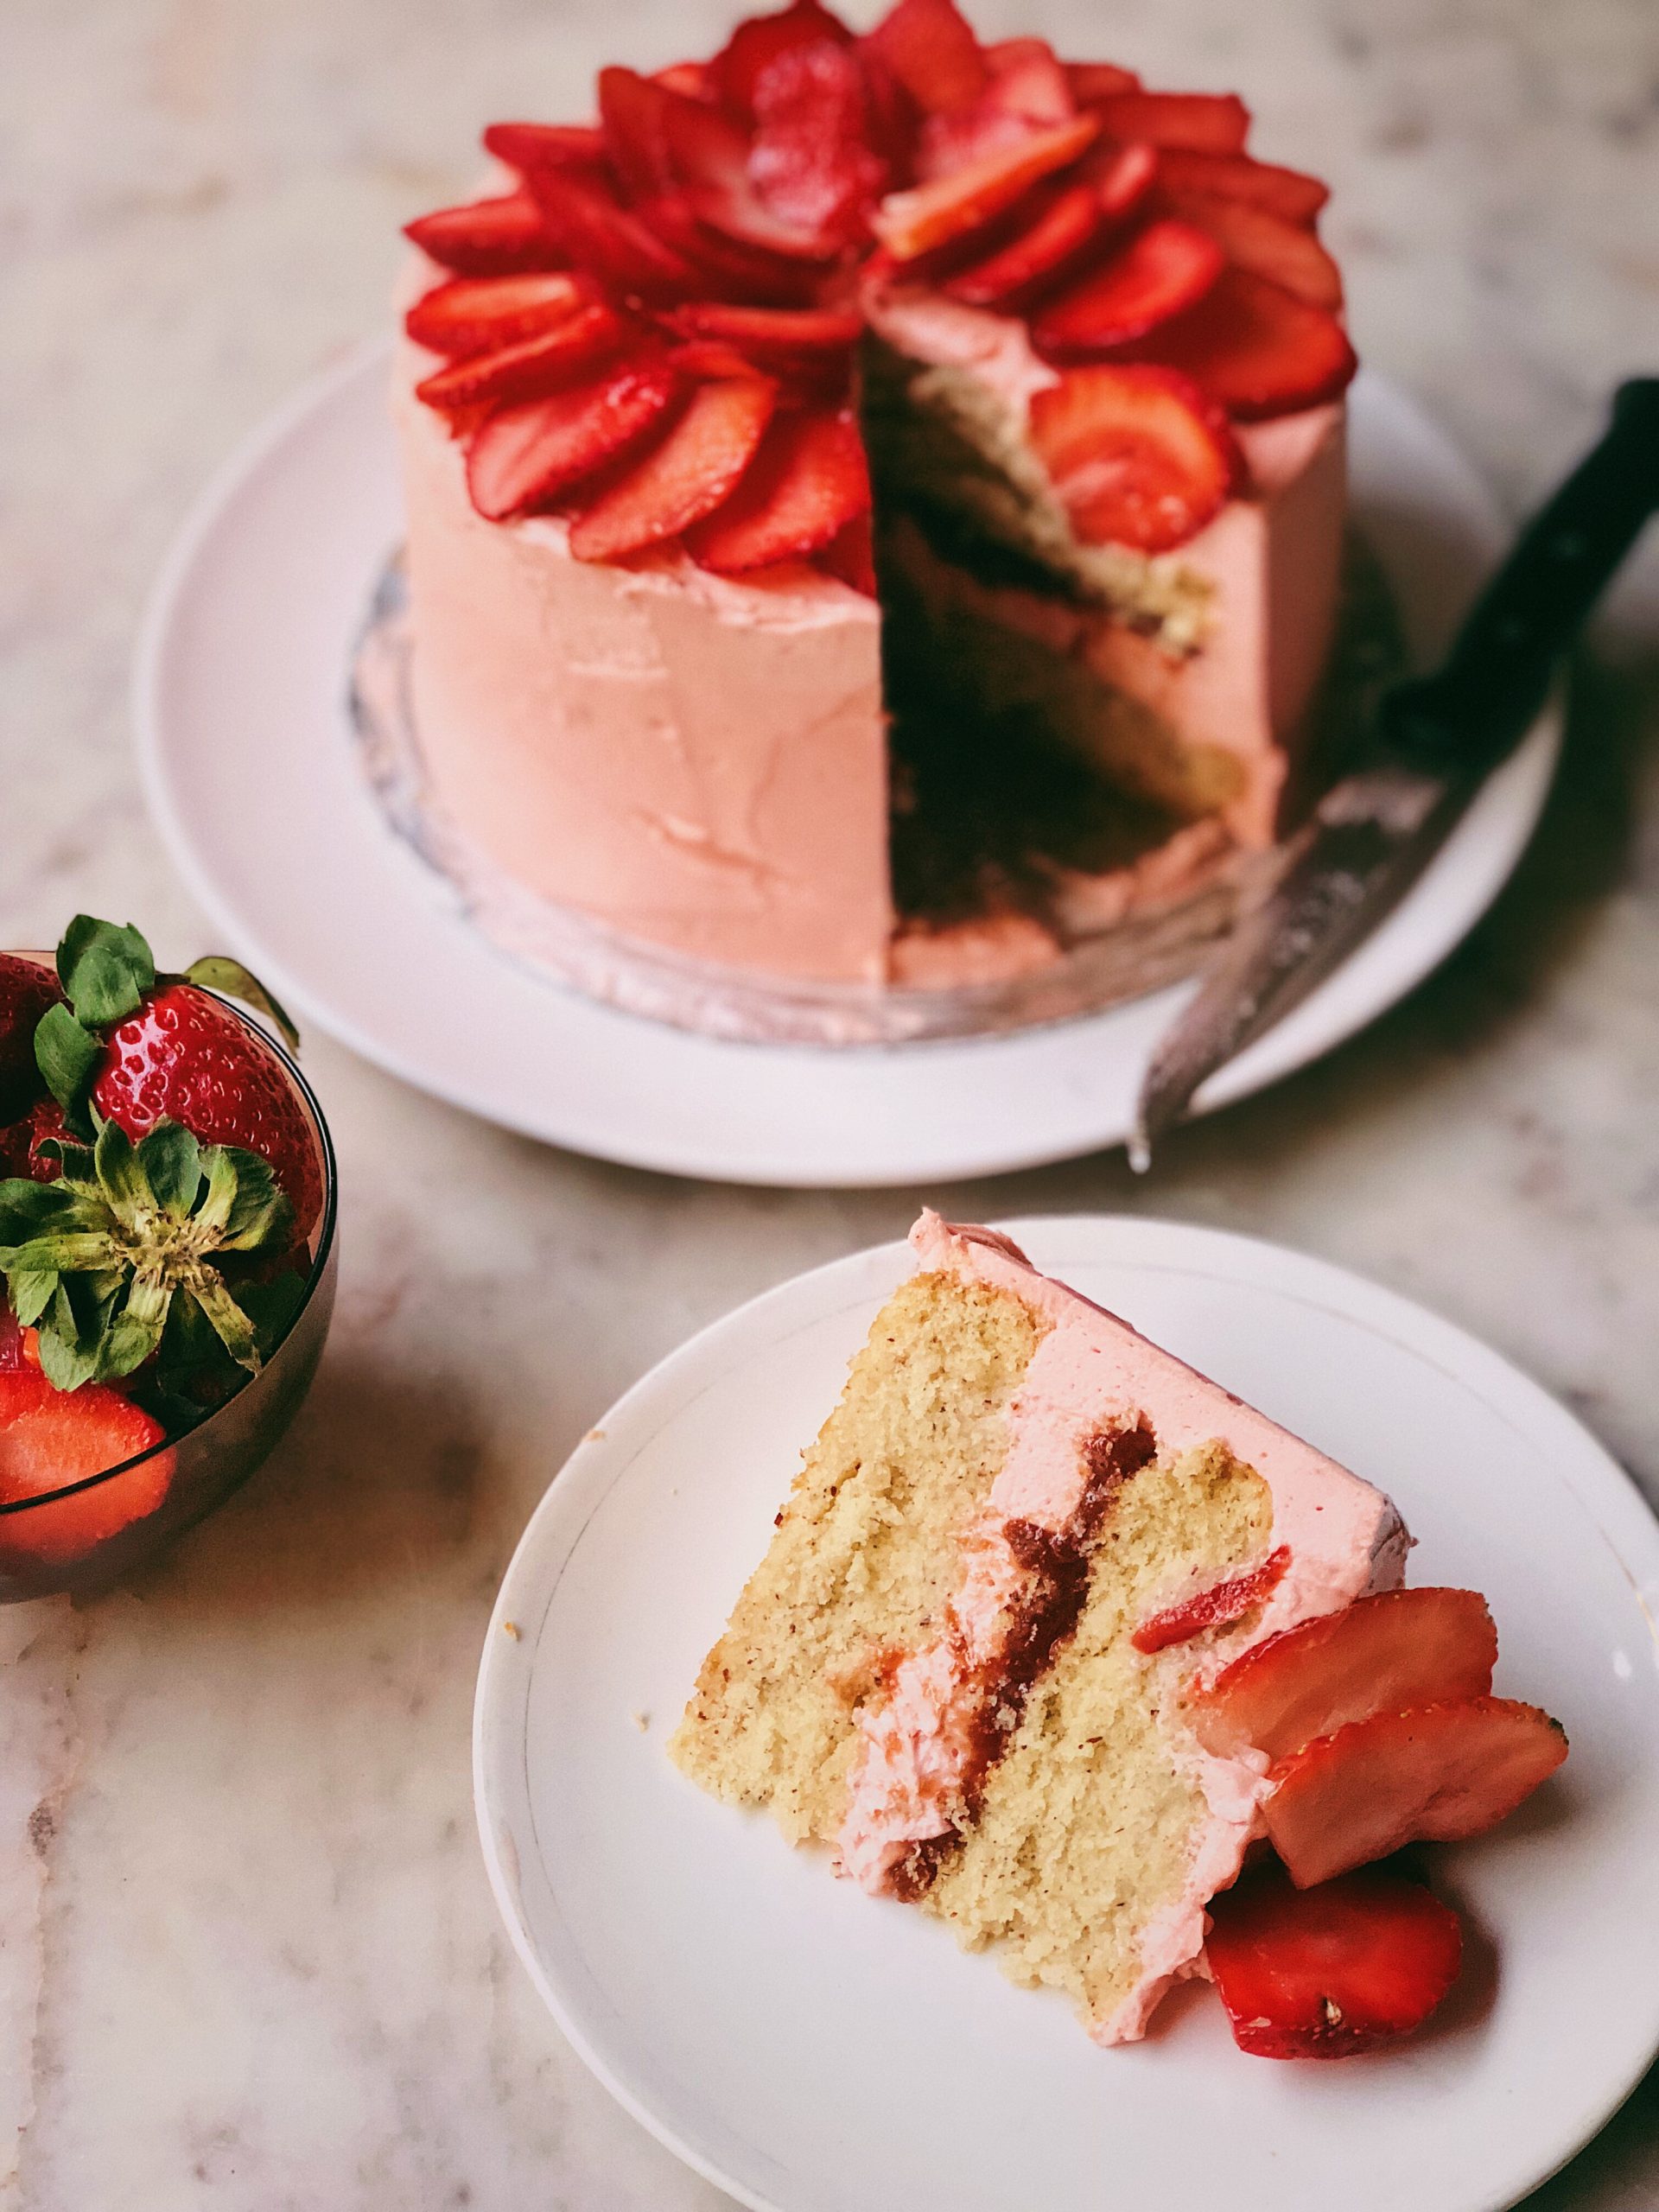 Rose Cake With Strawberry Tamarind Compote and White Chocolate Buttercream